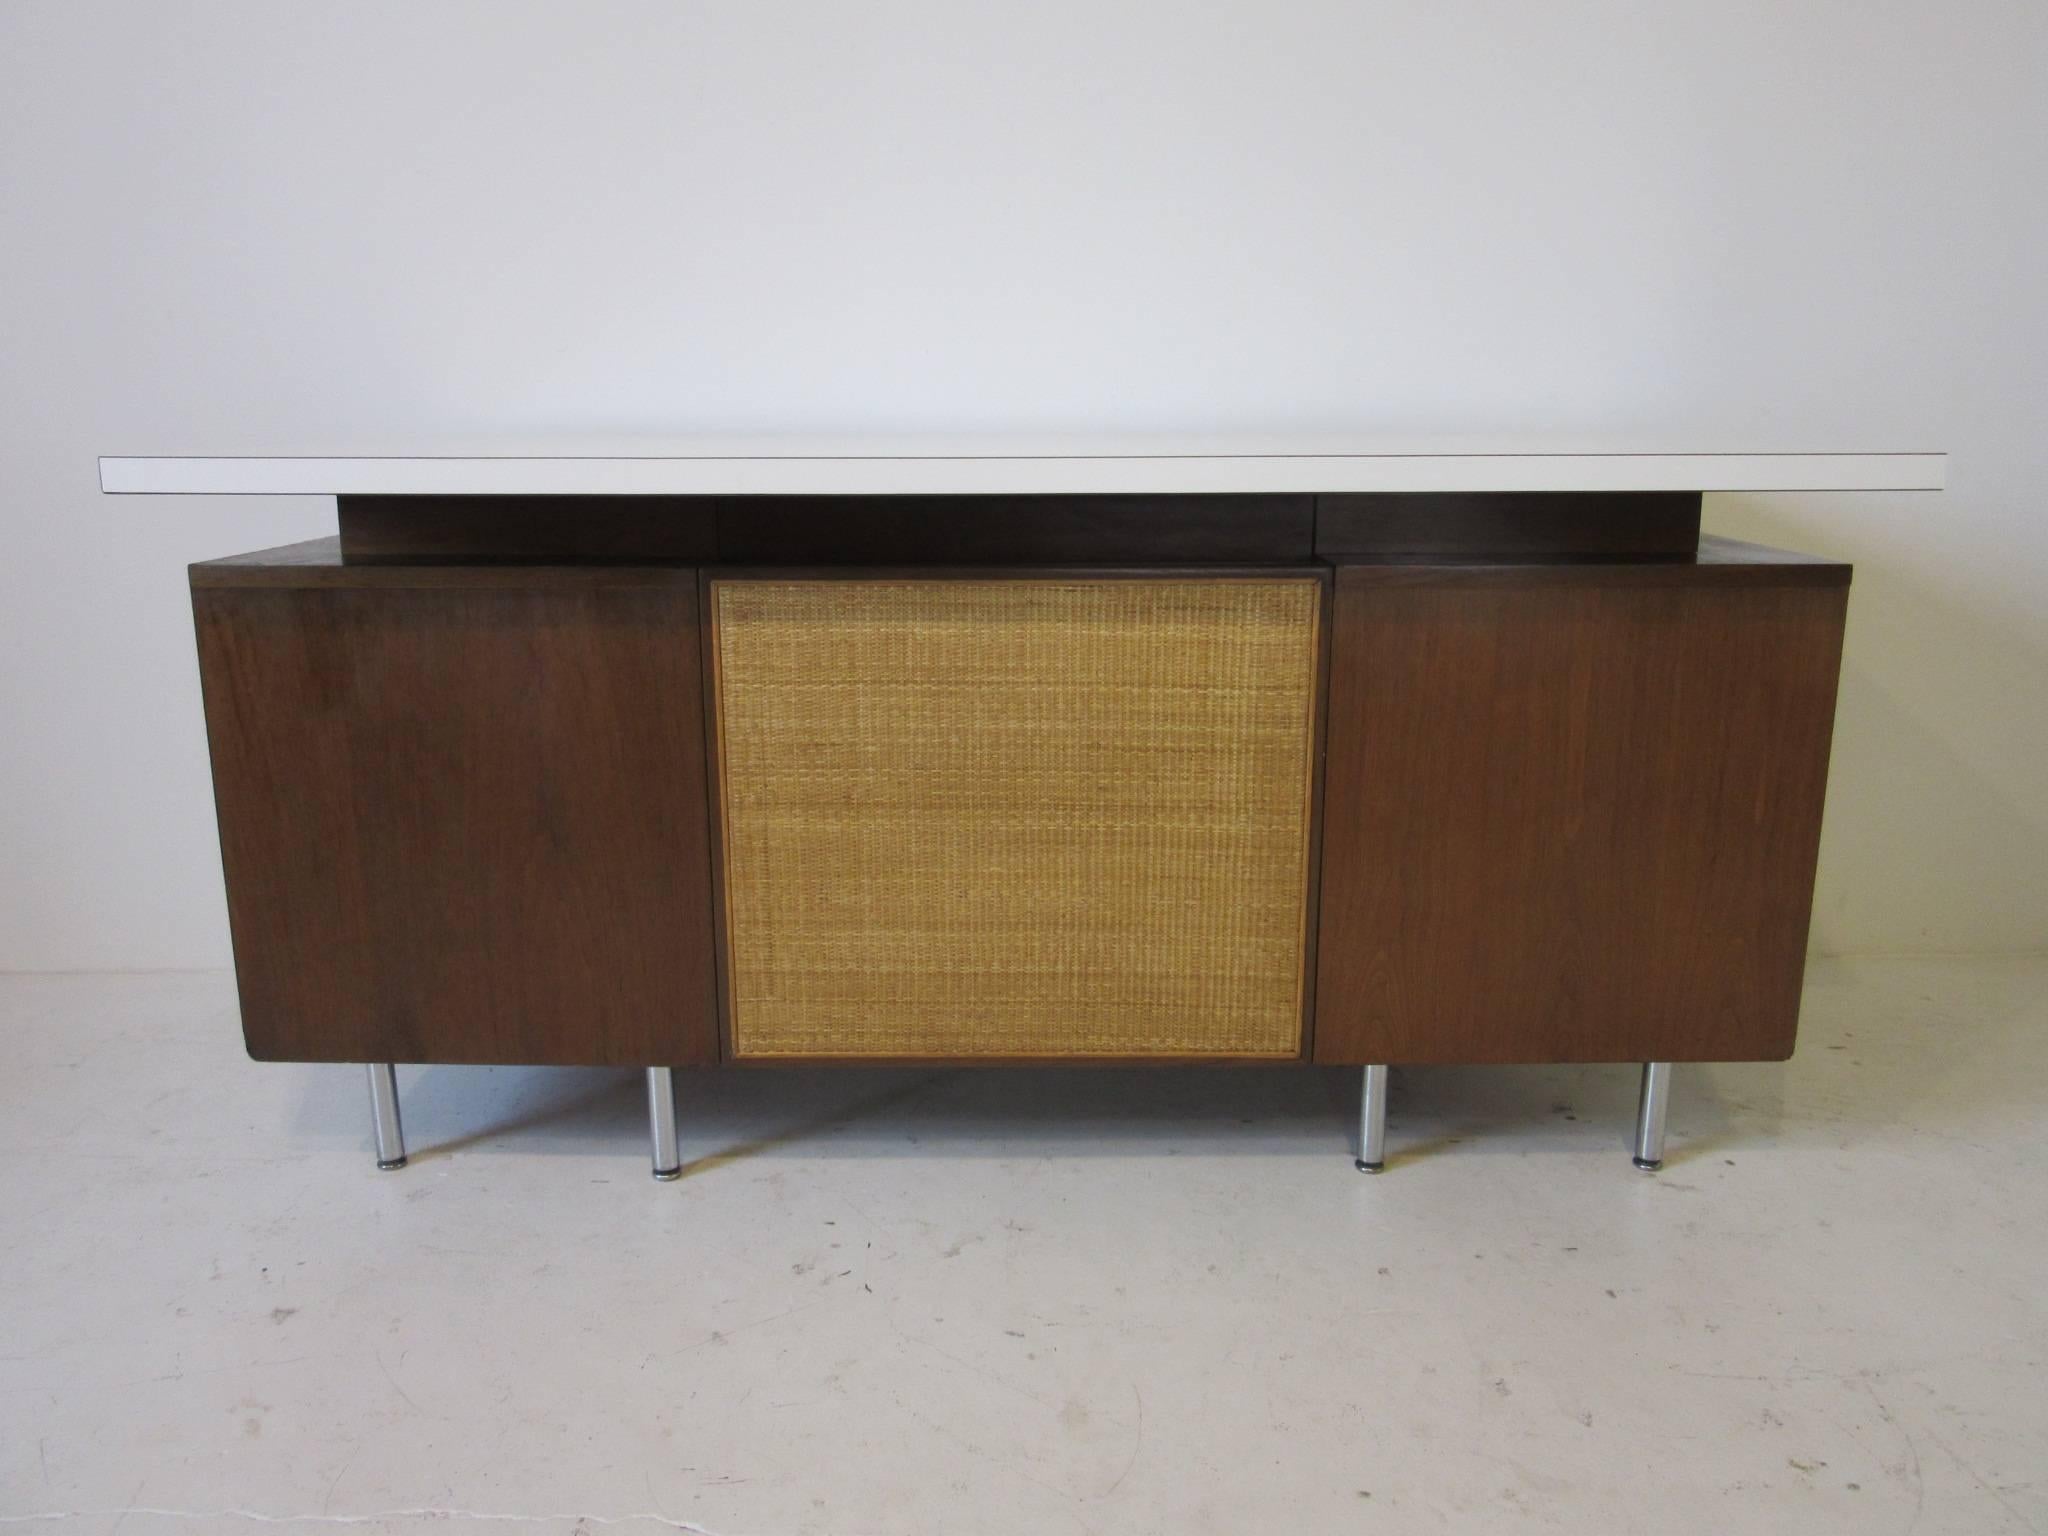 A walnut four drawer desk with aluminum J pulls, chromed steel legs, woven privacy panel and topped in white Laminate was designed and fitted for a
Bank building. The National Historic Landmark bank was designed by Eero Saarinen and was completed